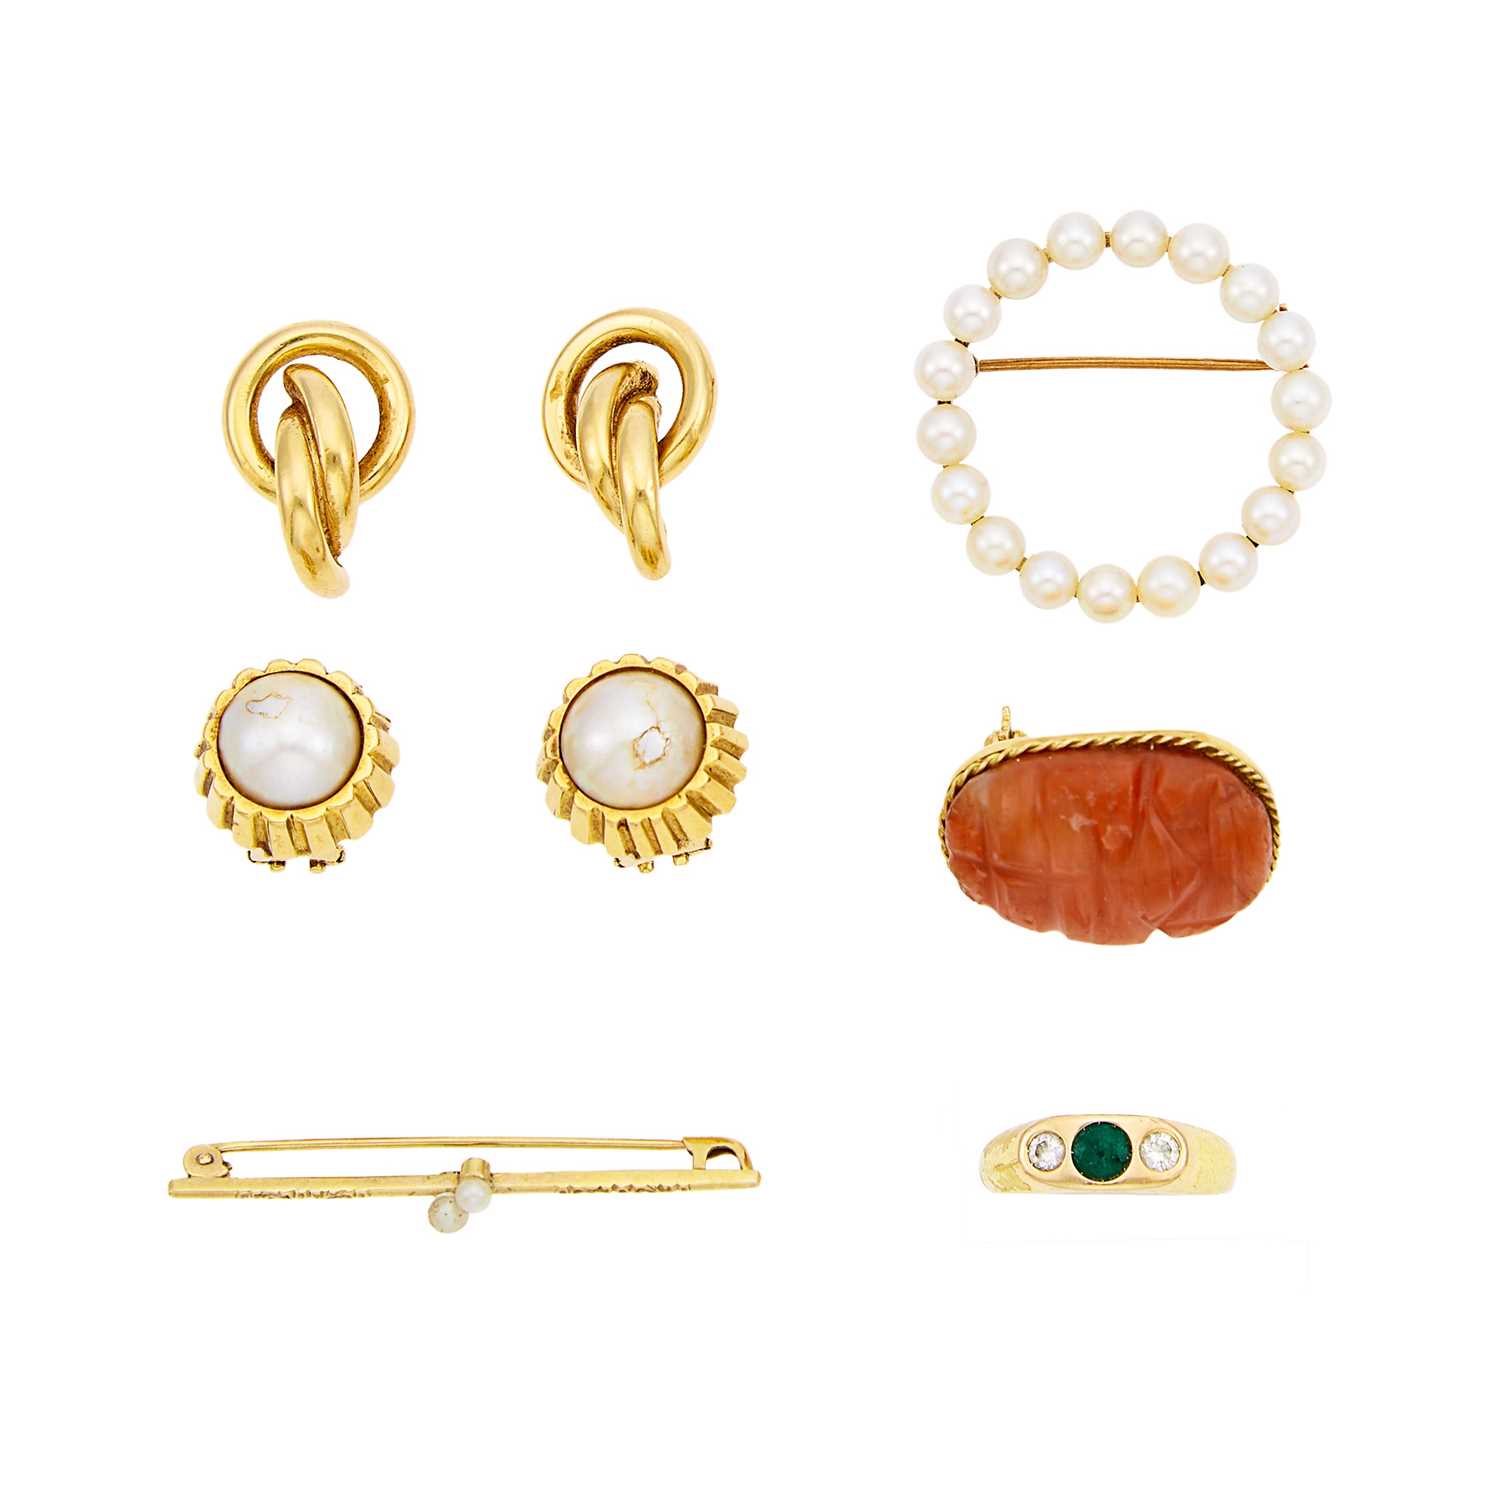 Lot 1136 - Group of Gold, Cultured Pearl and Hardstone Jewelry